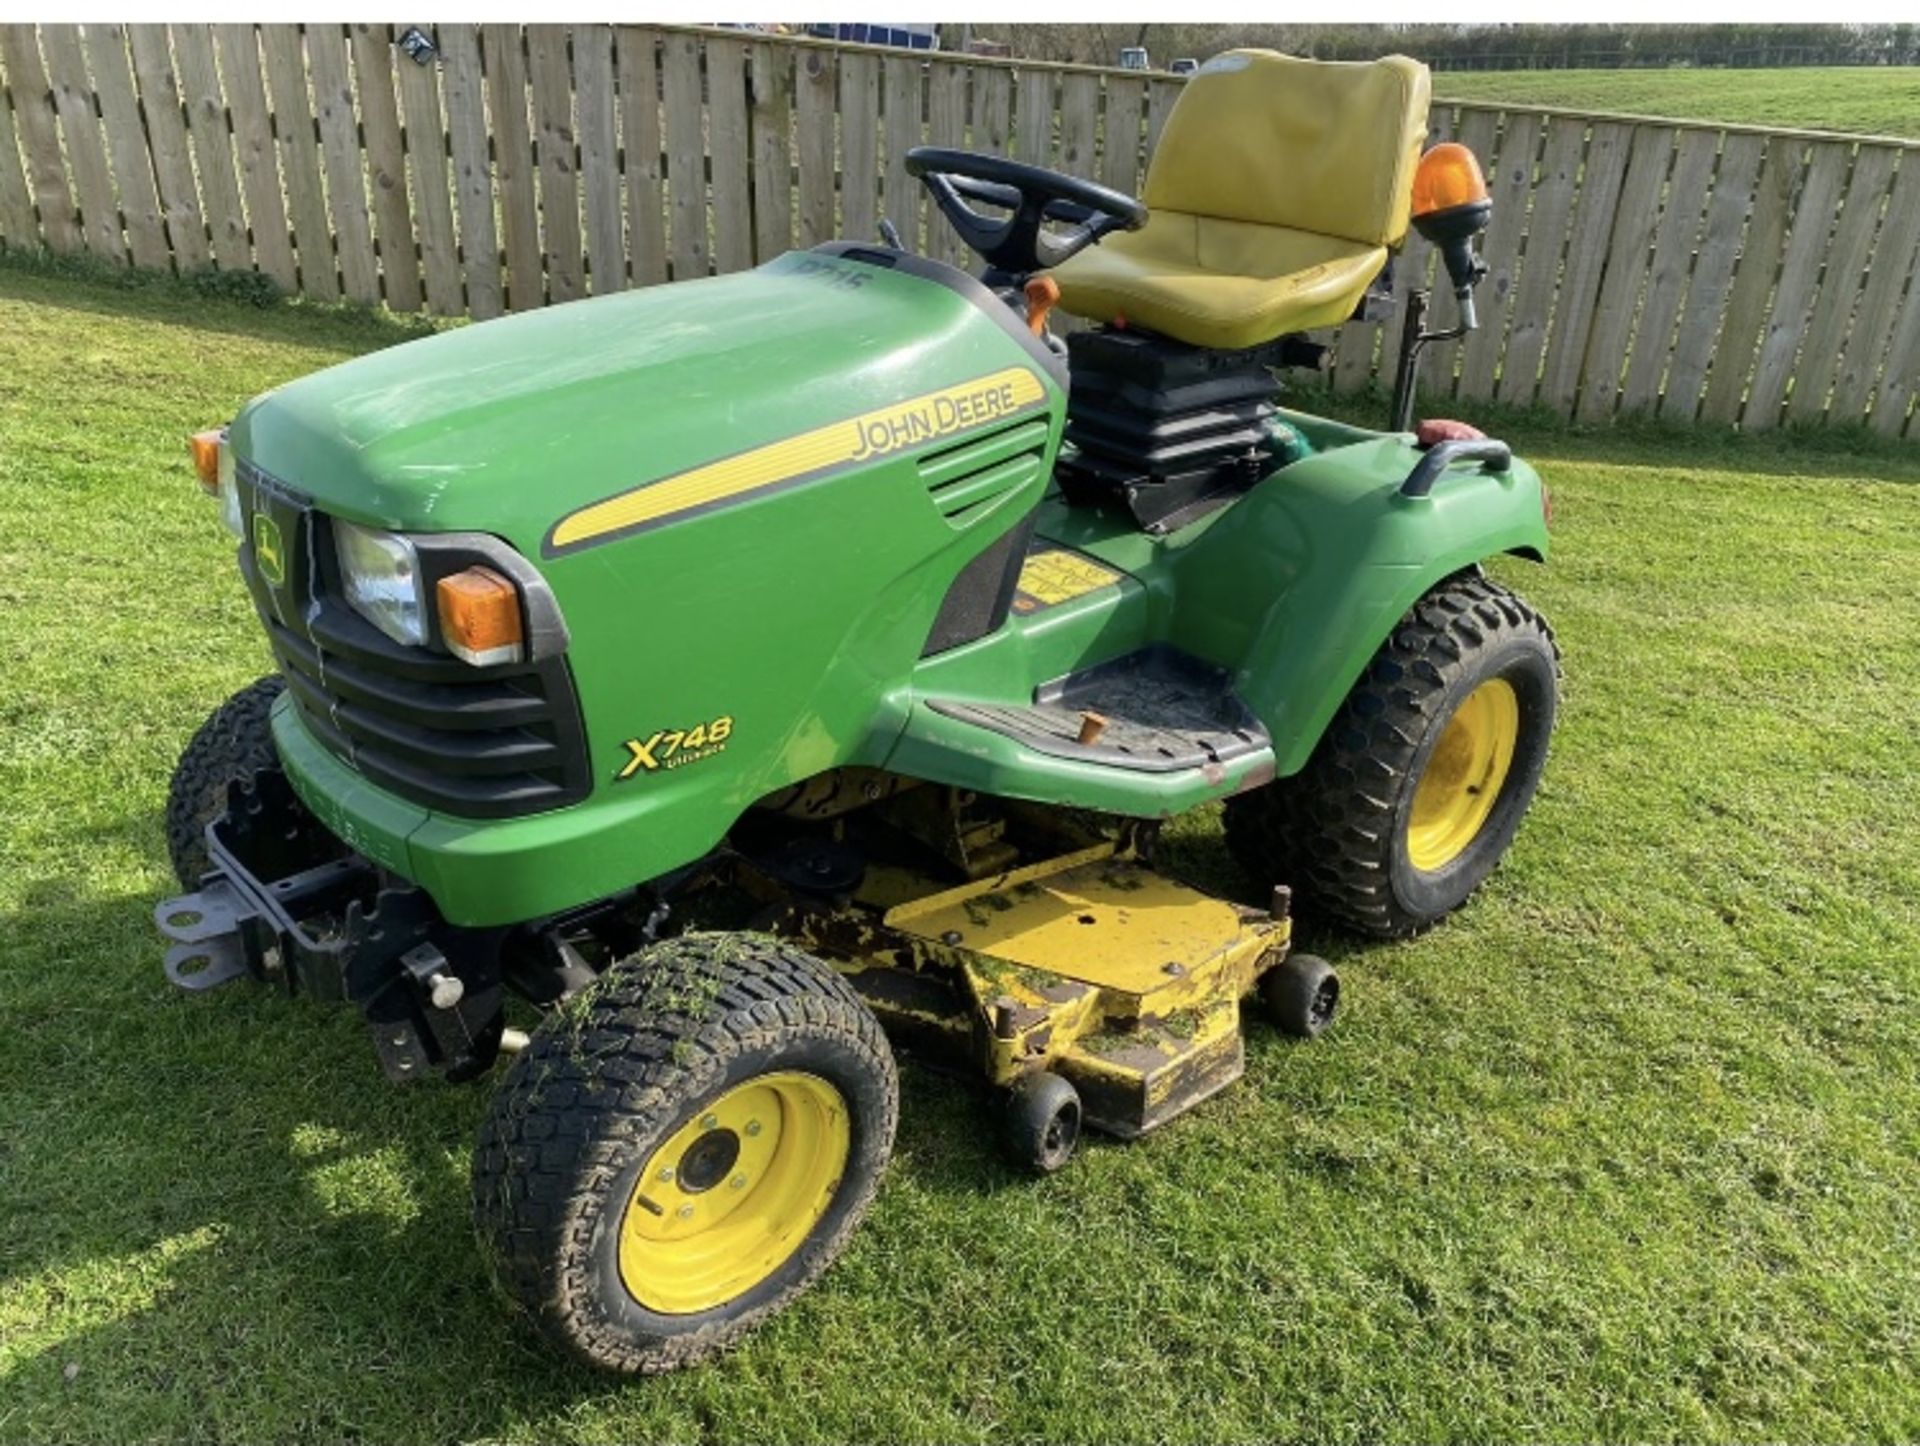 JOHN DEERE X748 DIESEL 4WD COMPANY TRACTOR RIDE ON MOWER LOCATION NORTH YORKSHIRE - Image 6 of 6